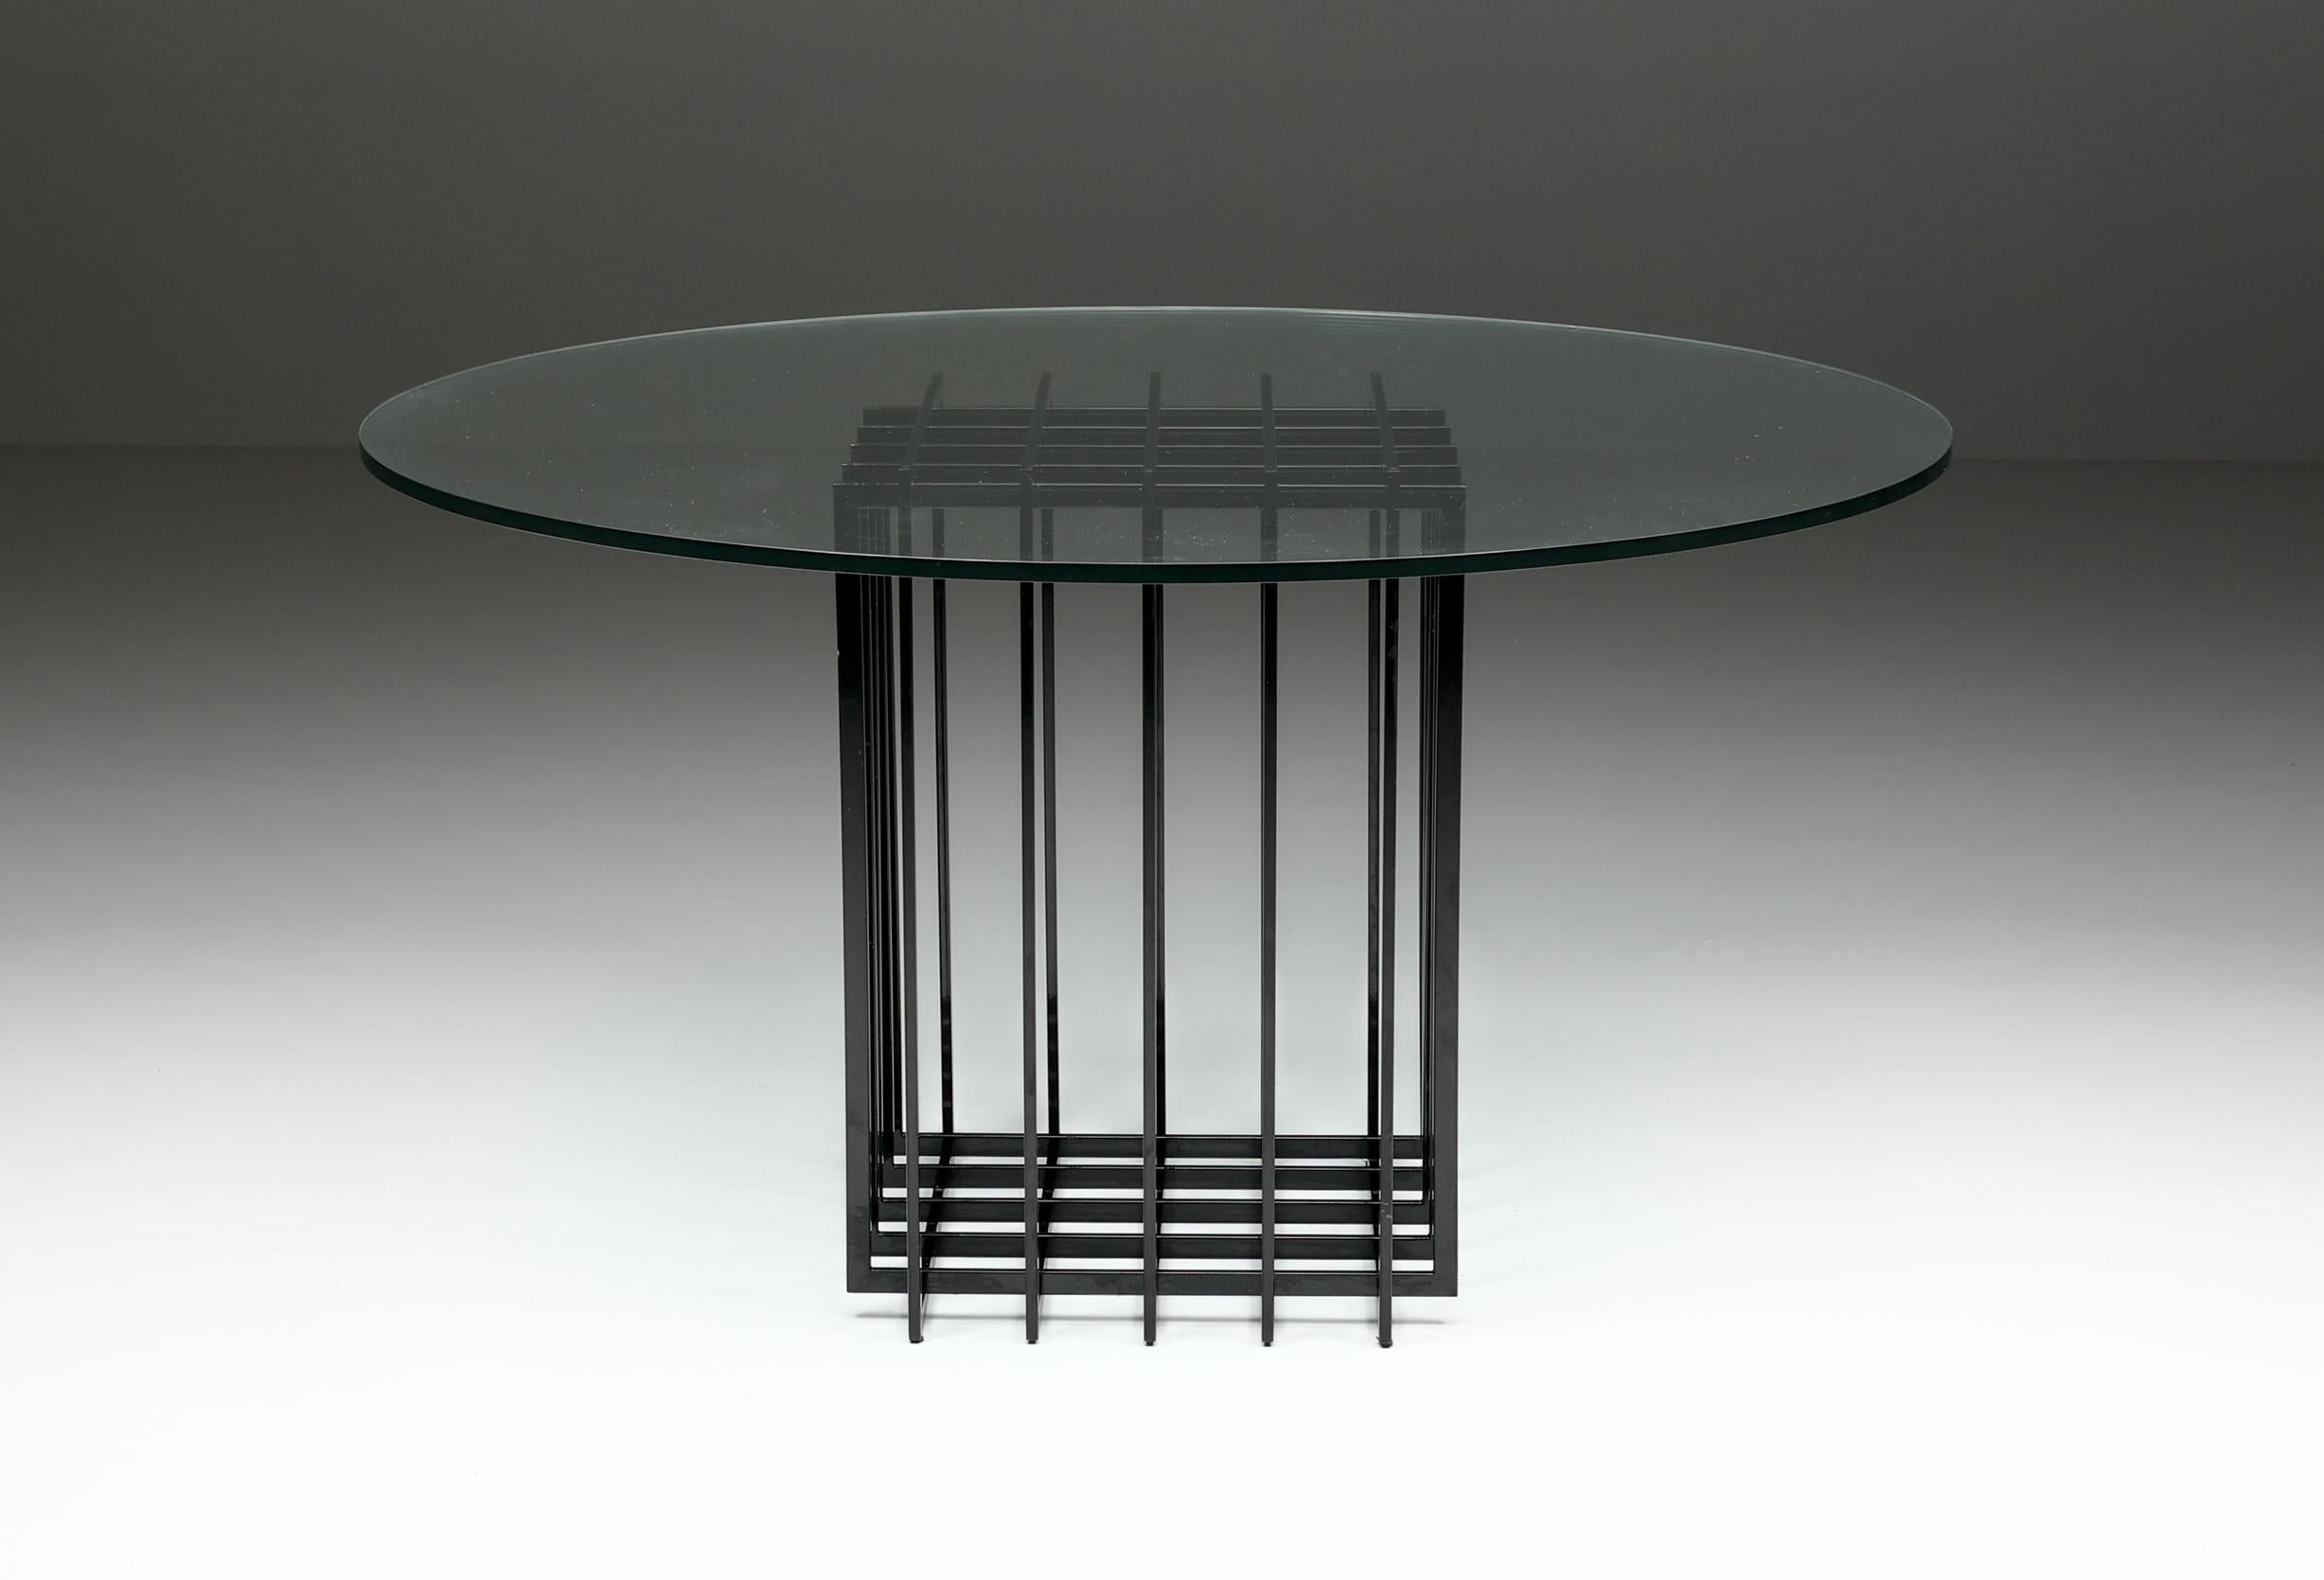 Table, in glass and metal, by Pierre Cardin, France, 1960s. 

Architectural writing or dining table by Pierre Cardin in black-coated steel. Due to the use of a grid, the table features an elegant open expression. The clear glass top beautifully